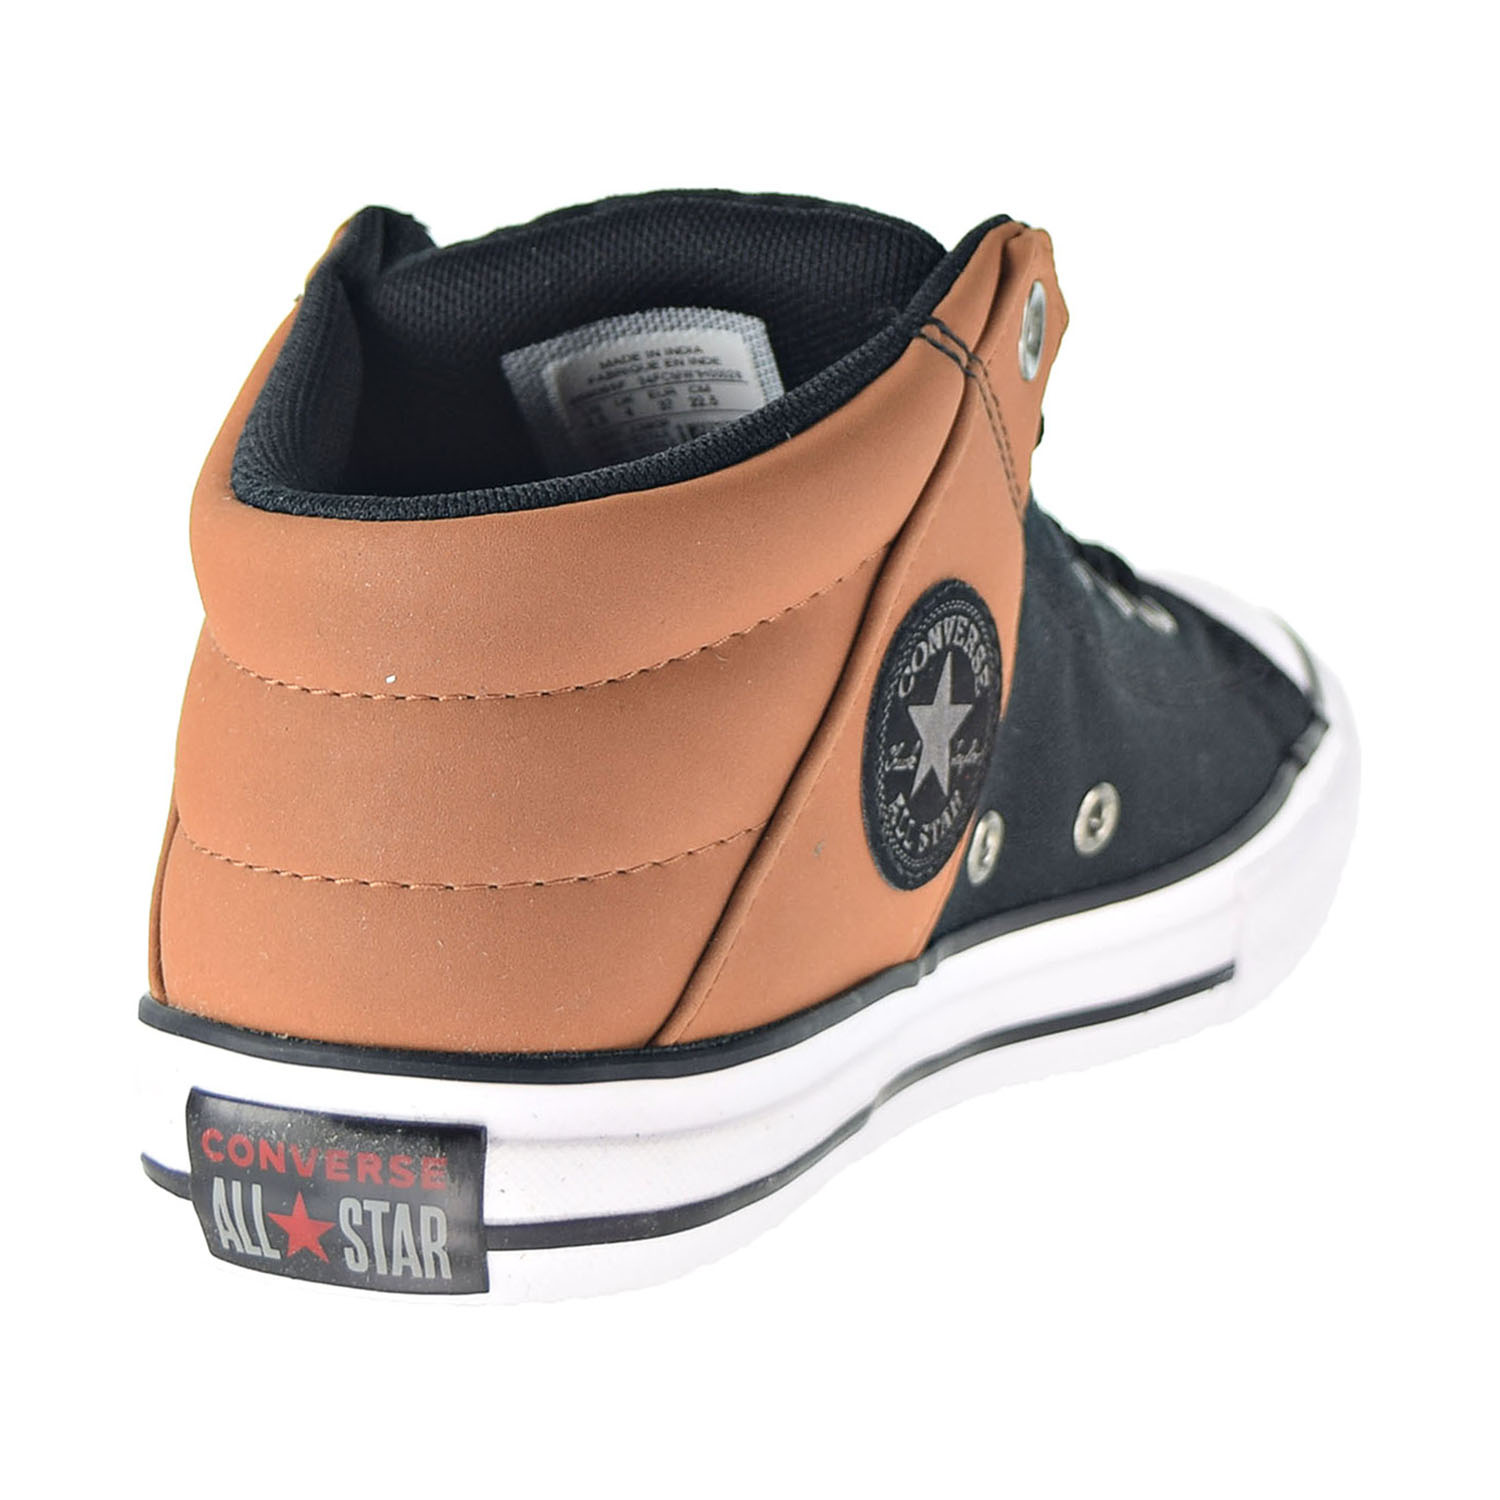 Converse Chuck Taylor All Star Axel Mid Kids' Shoes Black-Warm Tan-White 666065f - image 3 of 6